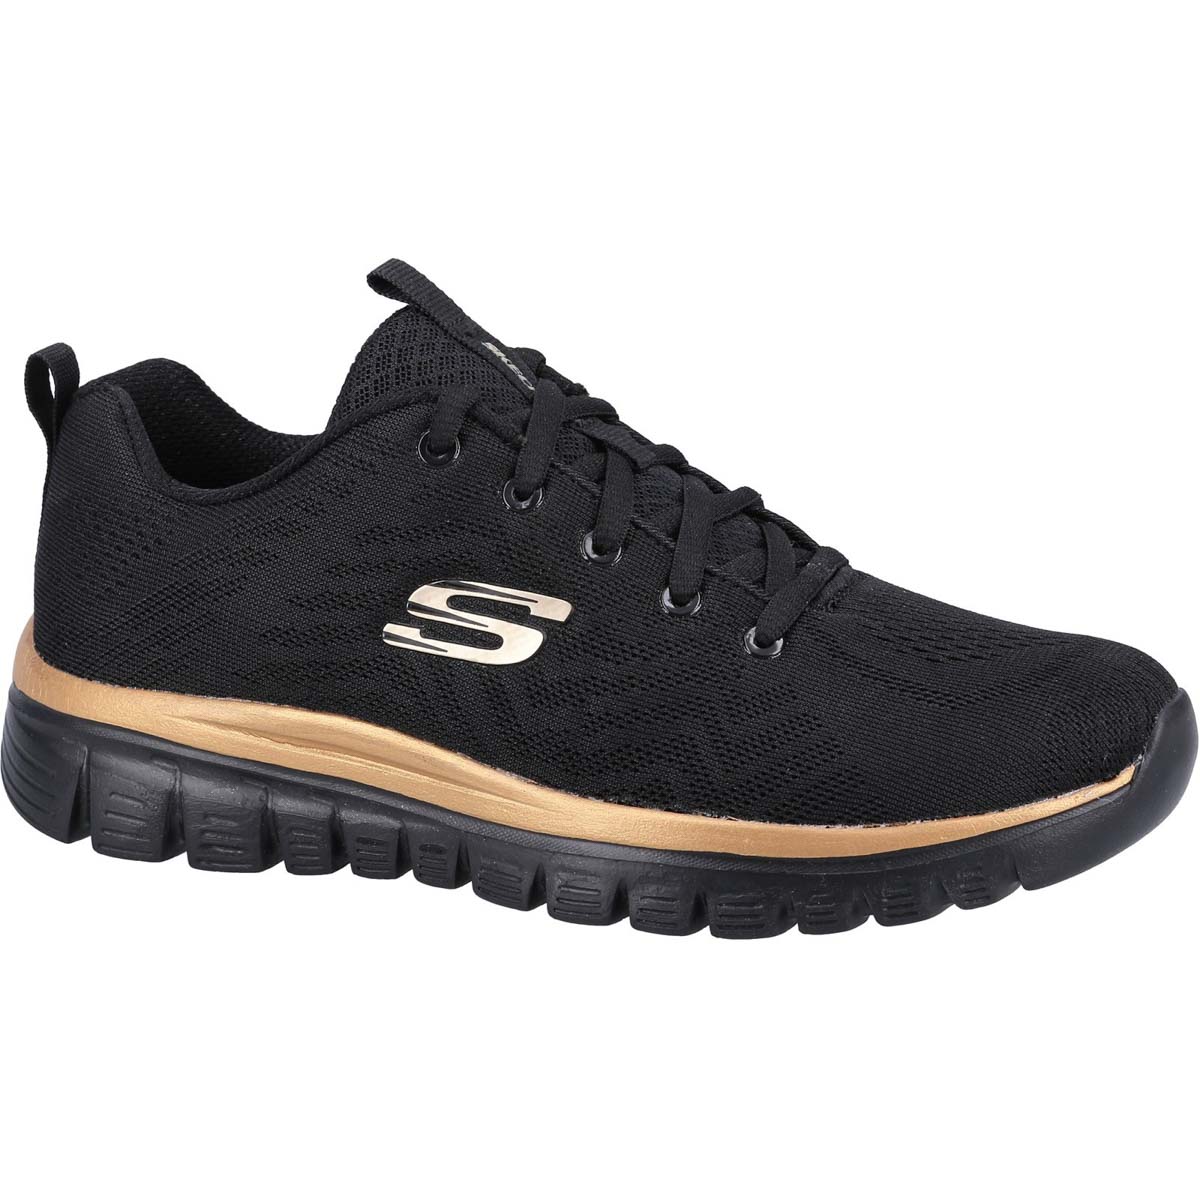 Skechers Graceful Get Connected Black Rose Gold Womens Trainers 12615 In Size 7 In Plain Black Rose Gold